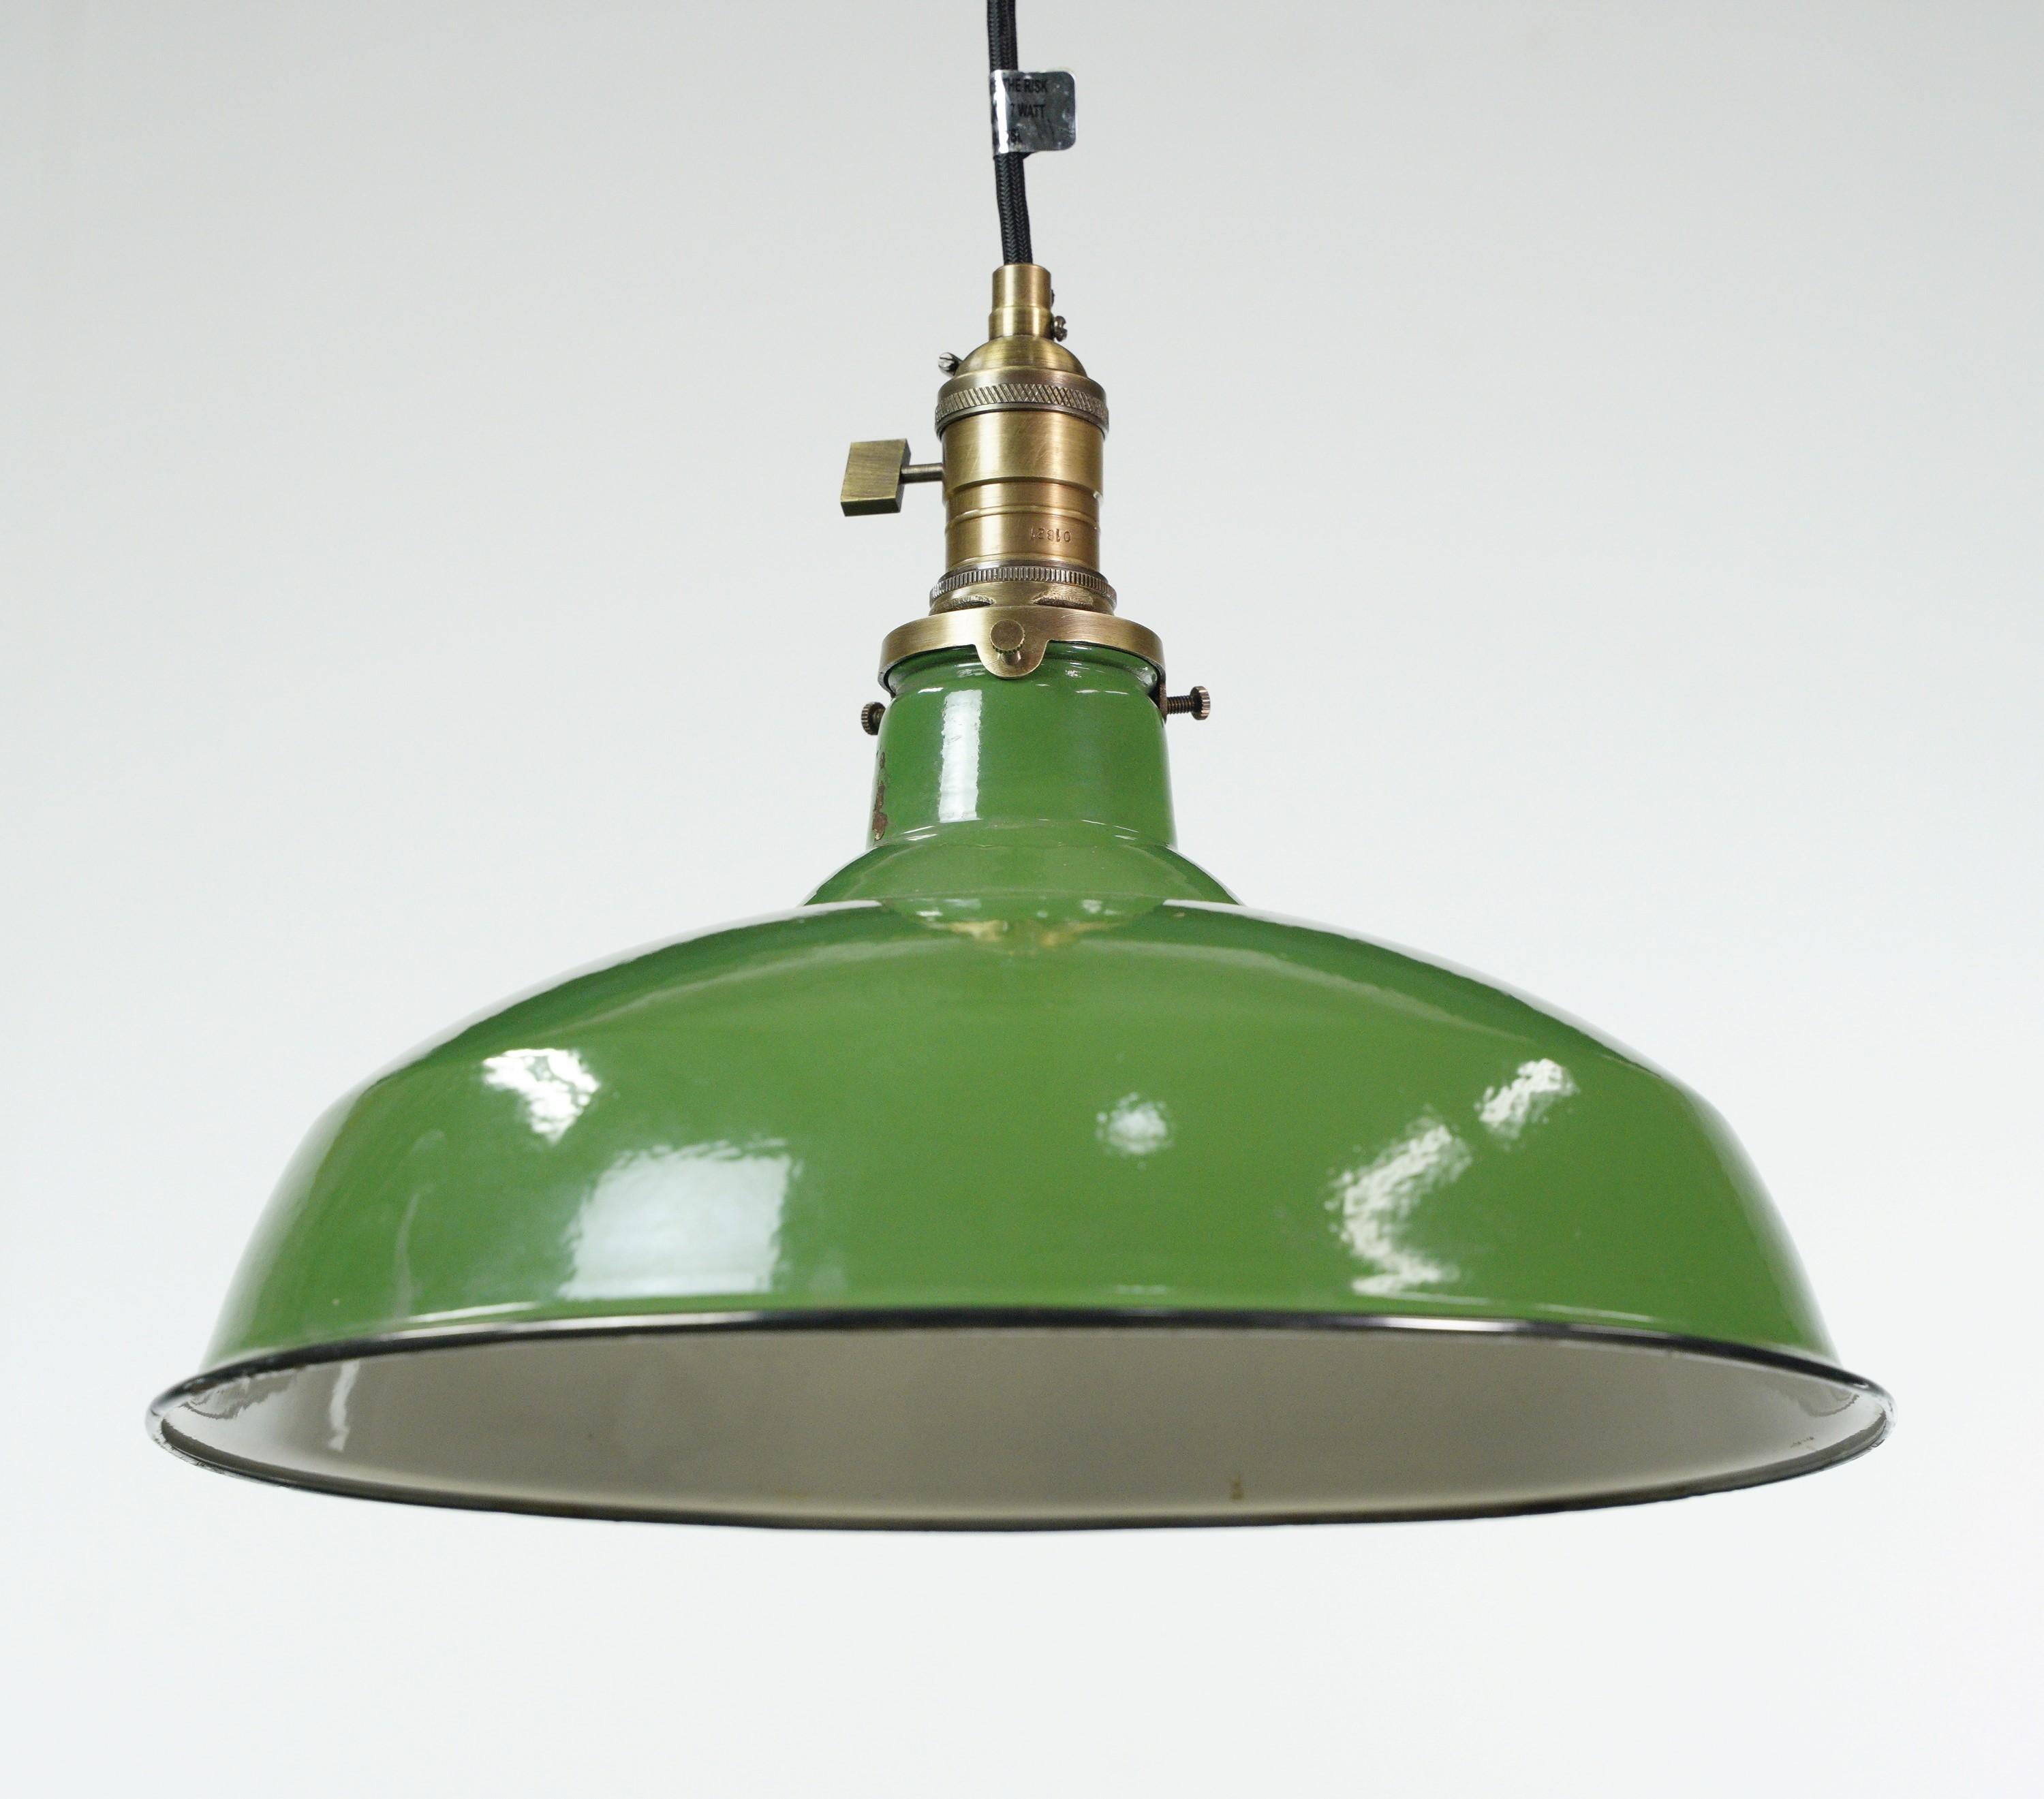 Industrial pendant light featuring a vintage green and white enameled steel shade with a newly made black cord and antique brass finished fitter. This unique blend of materials and finishes creates a bold statement piece that combines vintage charm